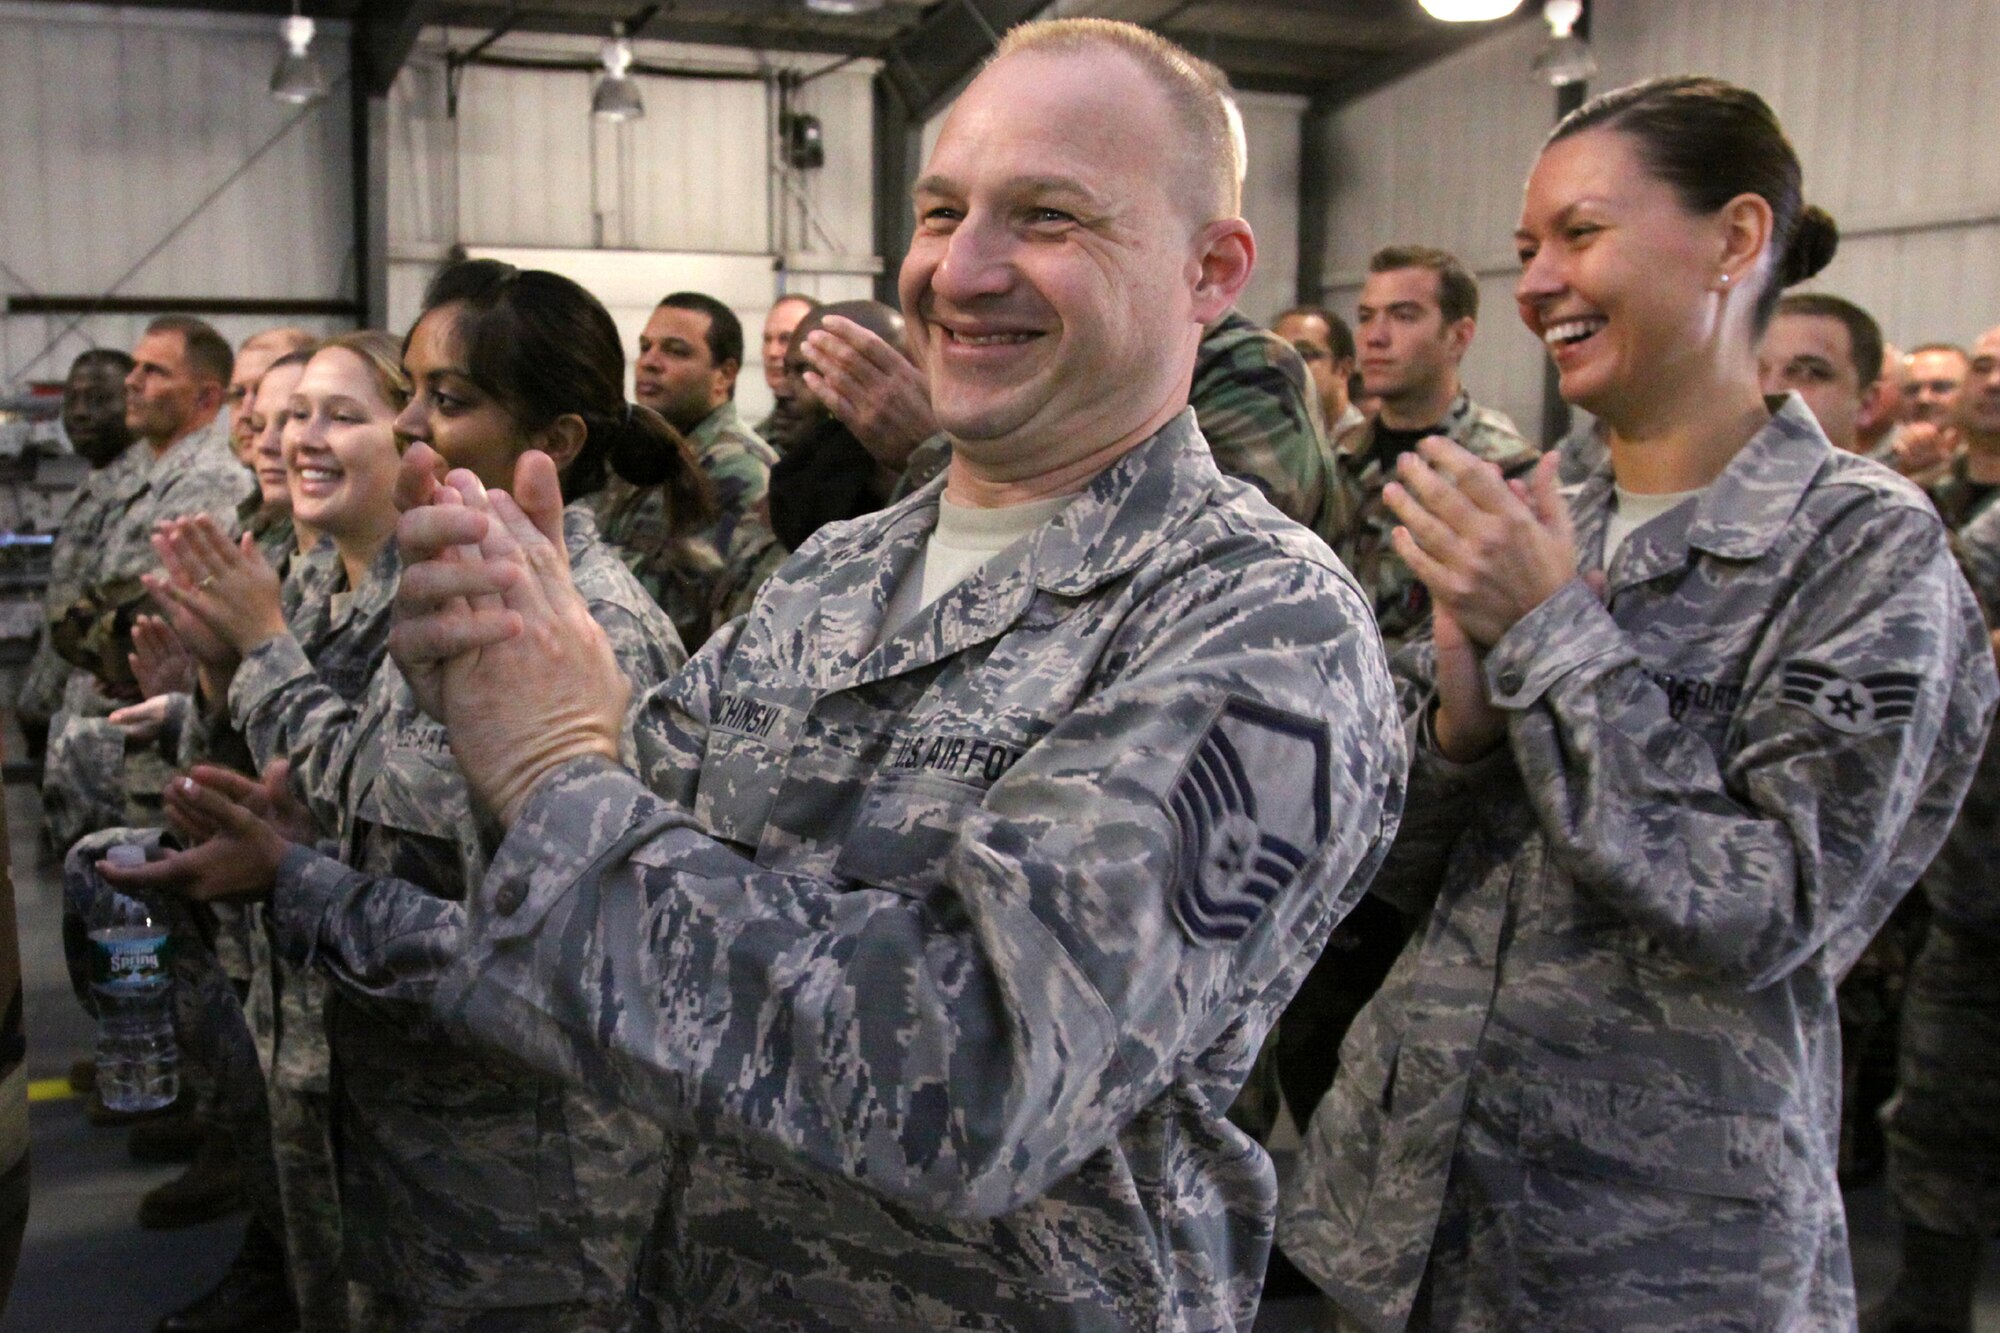 A picture of Airmen from the 177th Fighter Wing clapping.